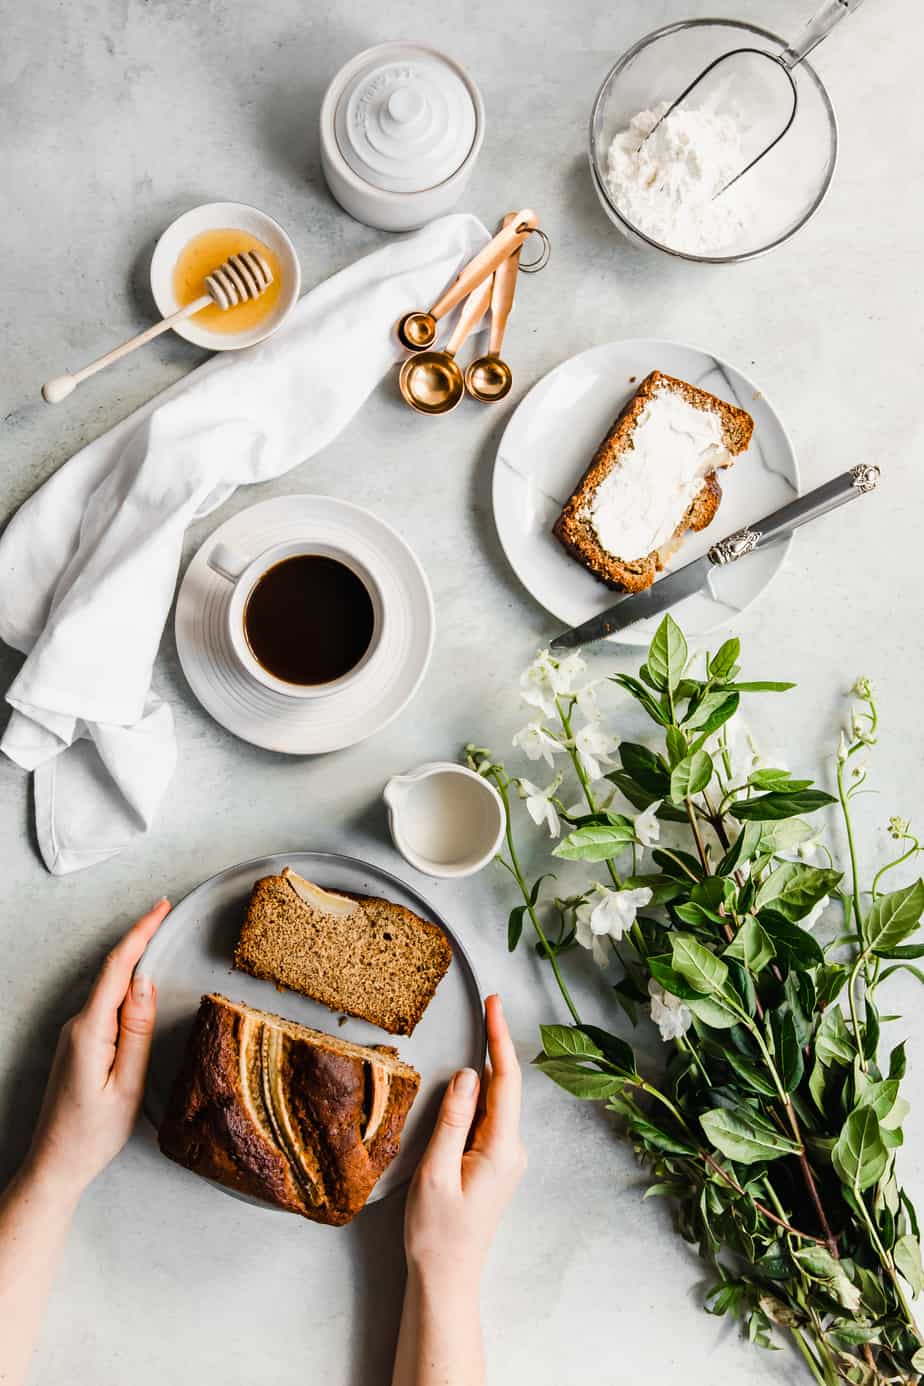 Banana bread with slices on a plate and cups of coffee and white flowers.